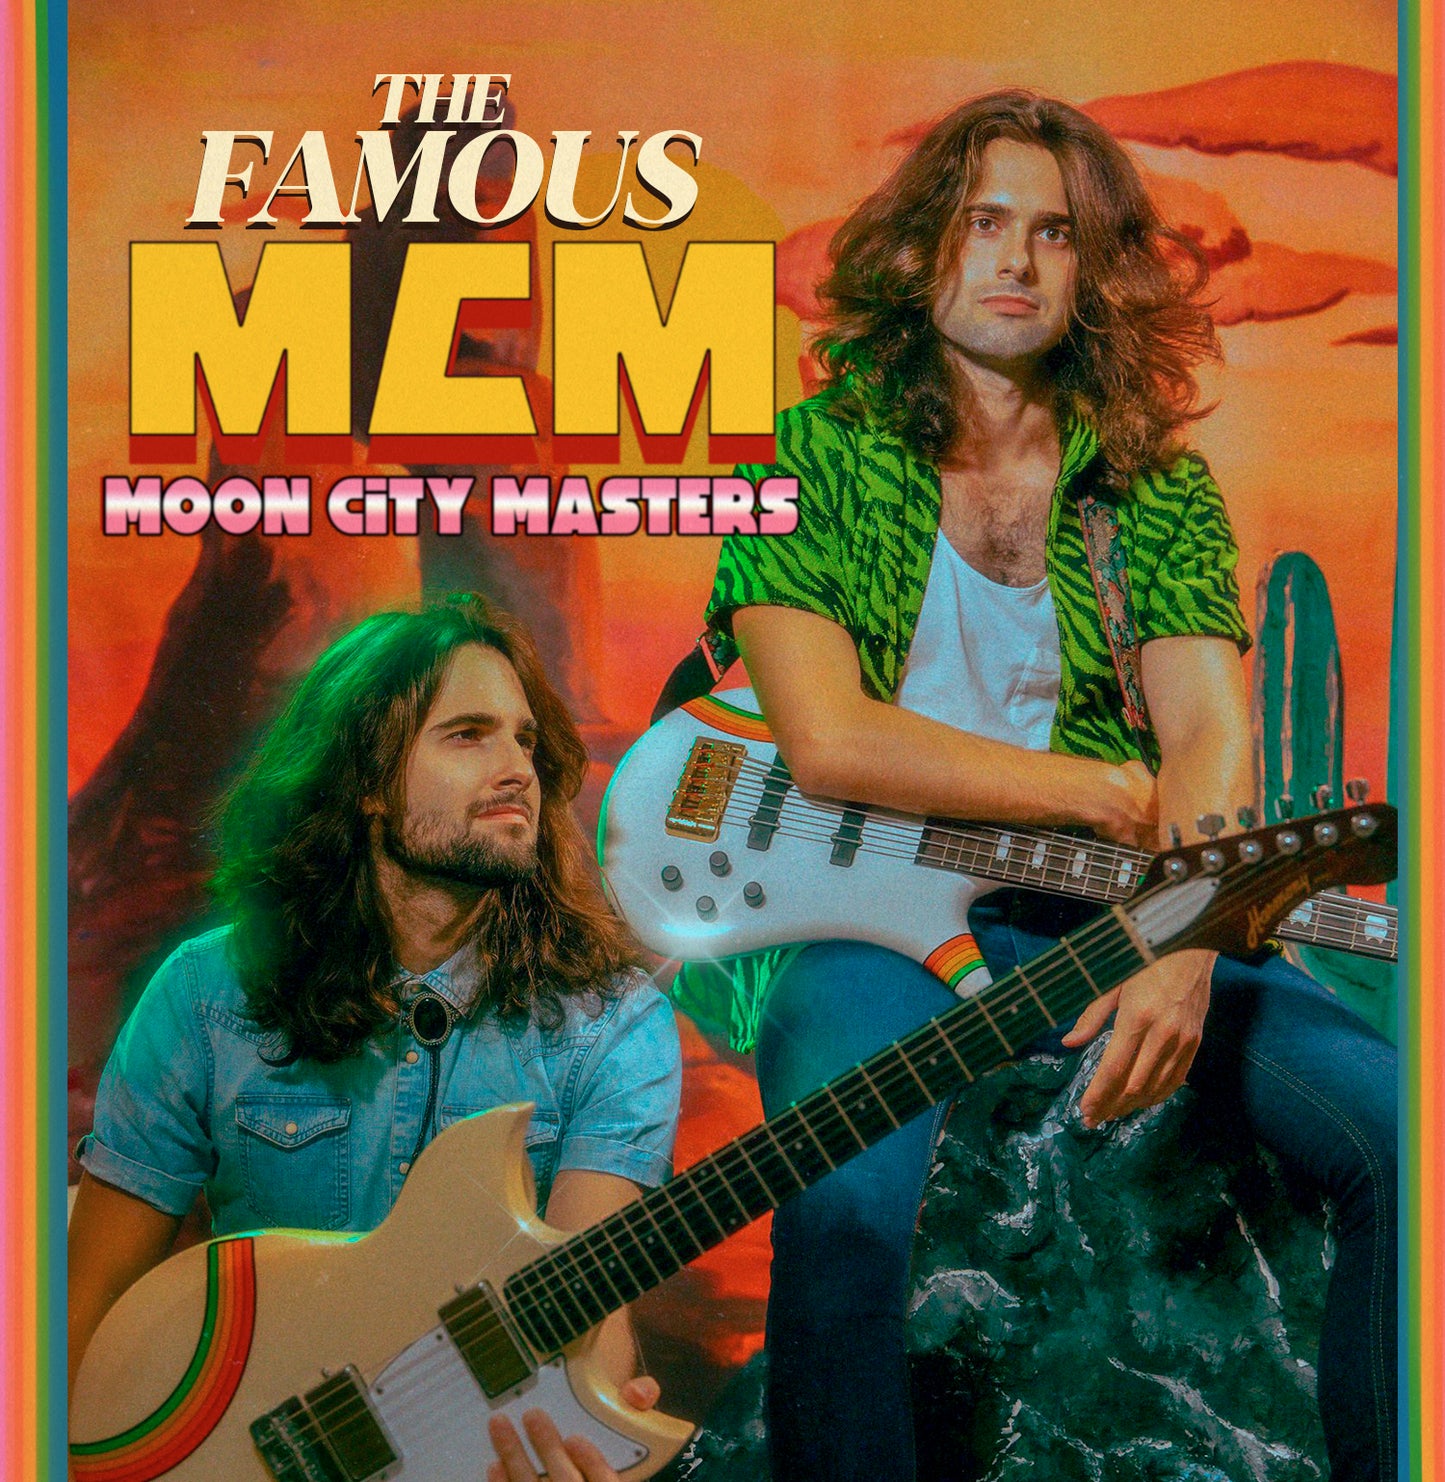 "The Famous Moon City Masters" CD